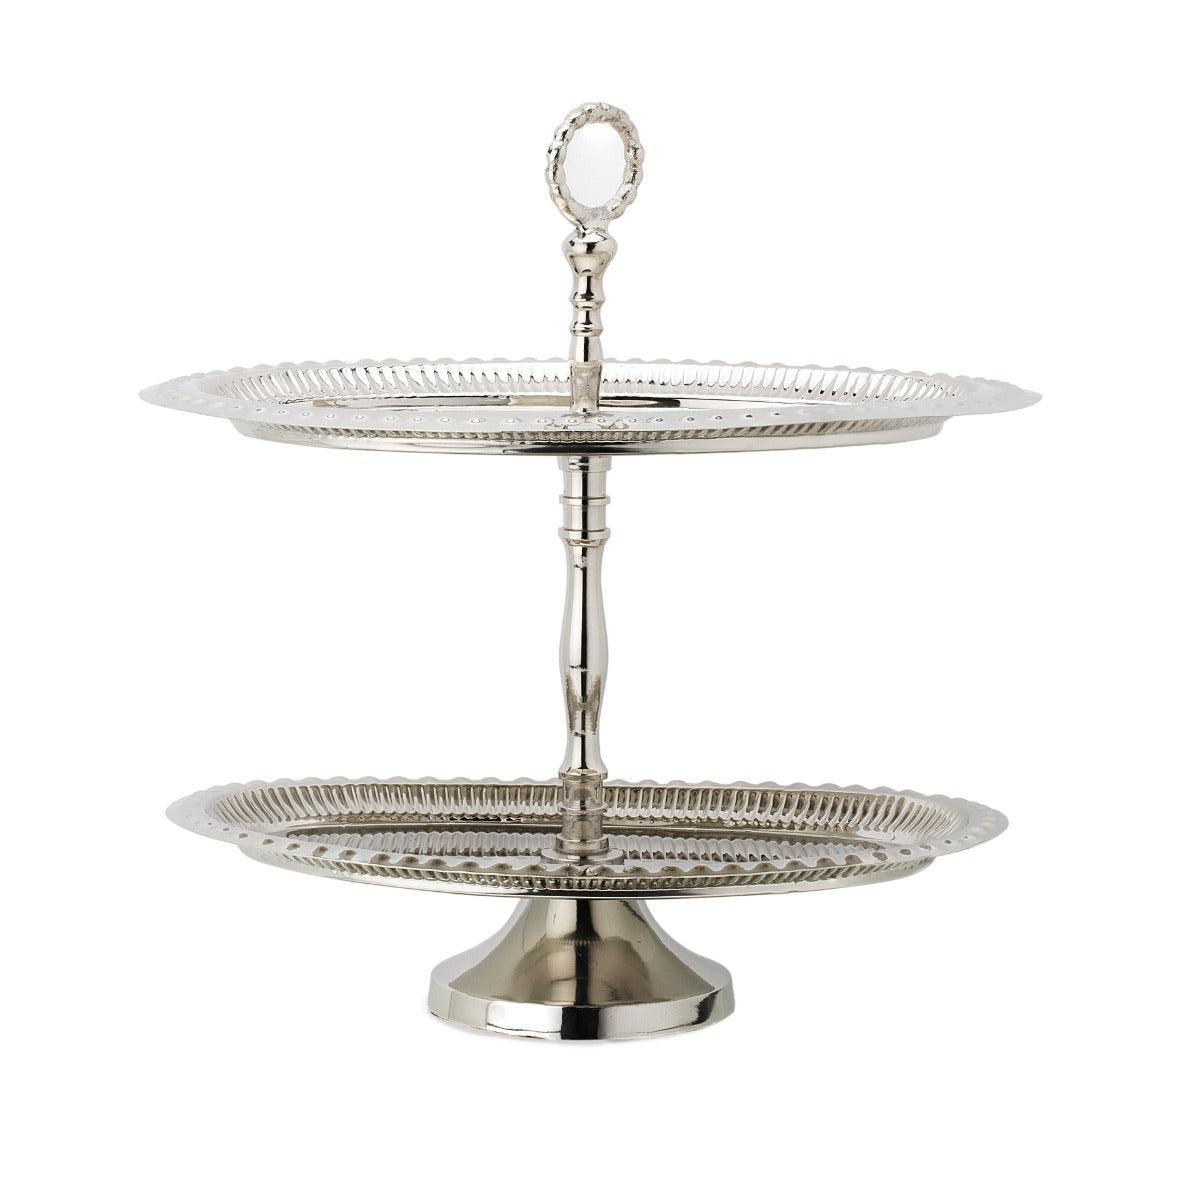 SS Cake Stand 2 Tier Silver